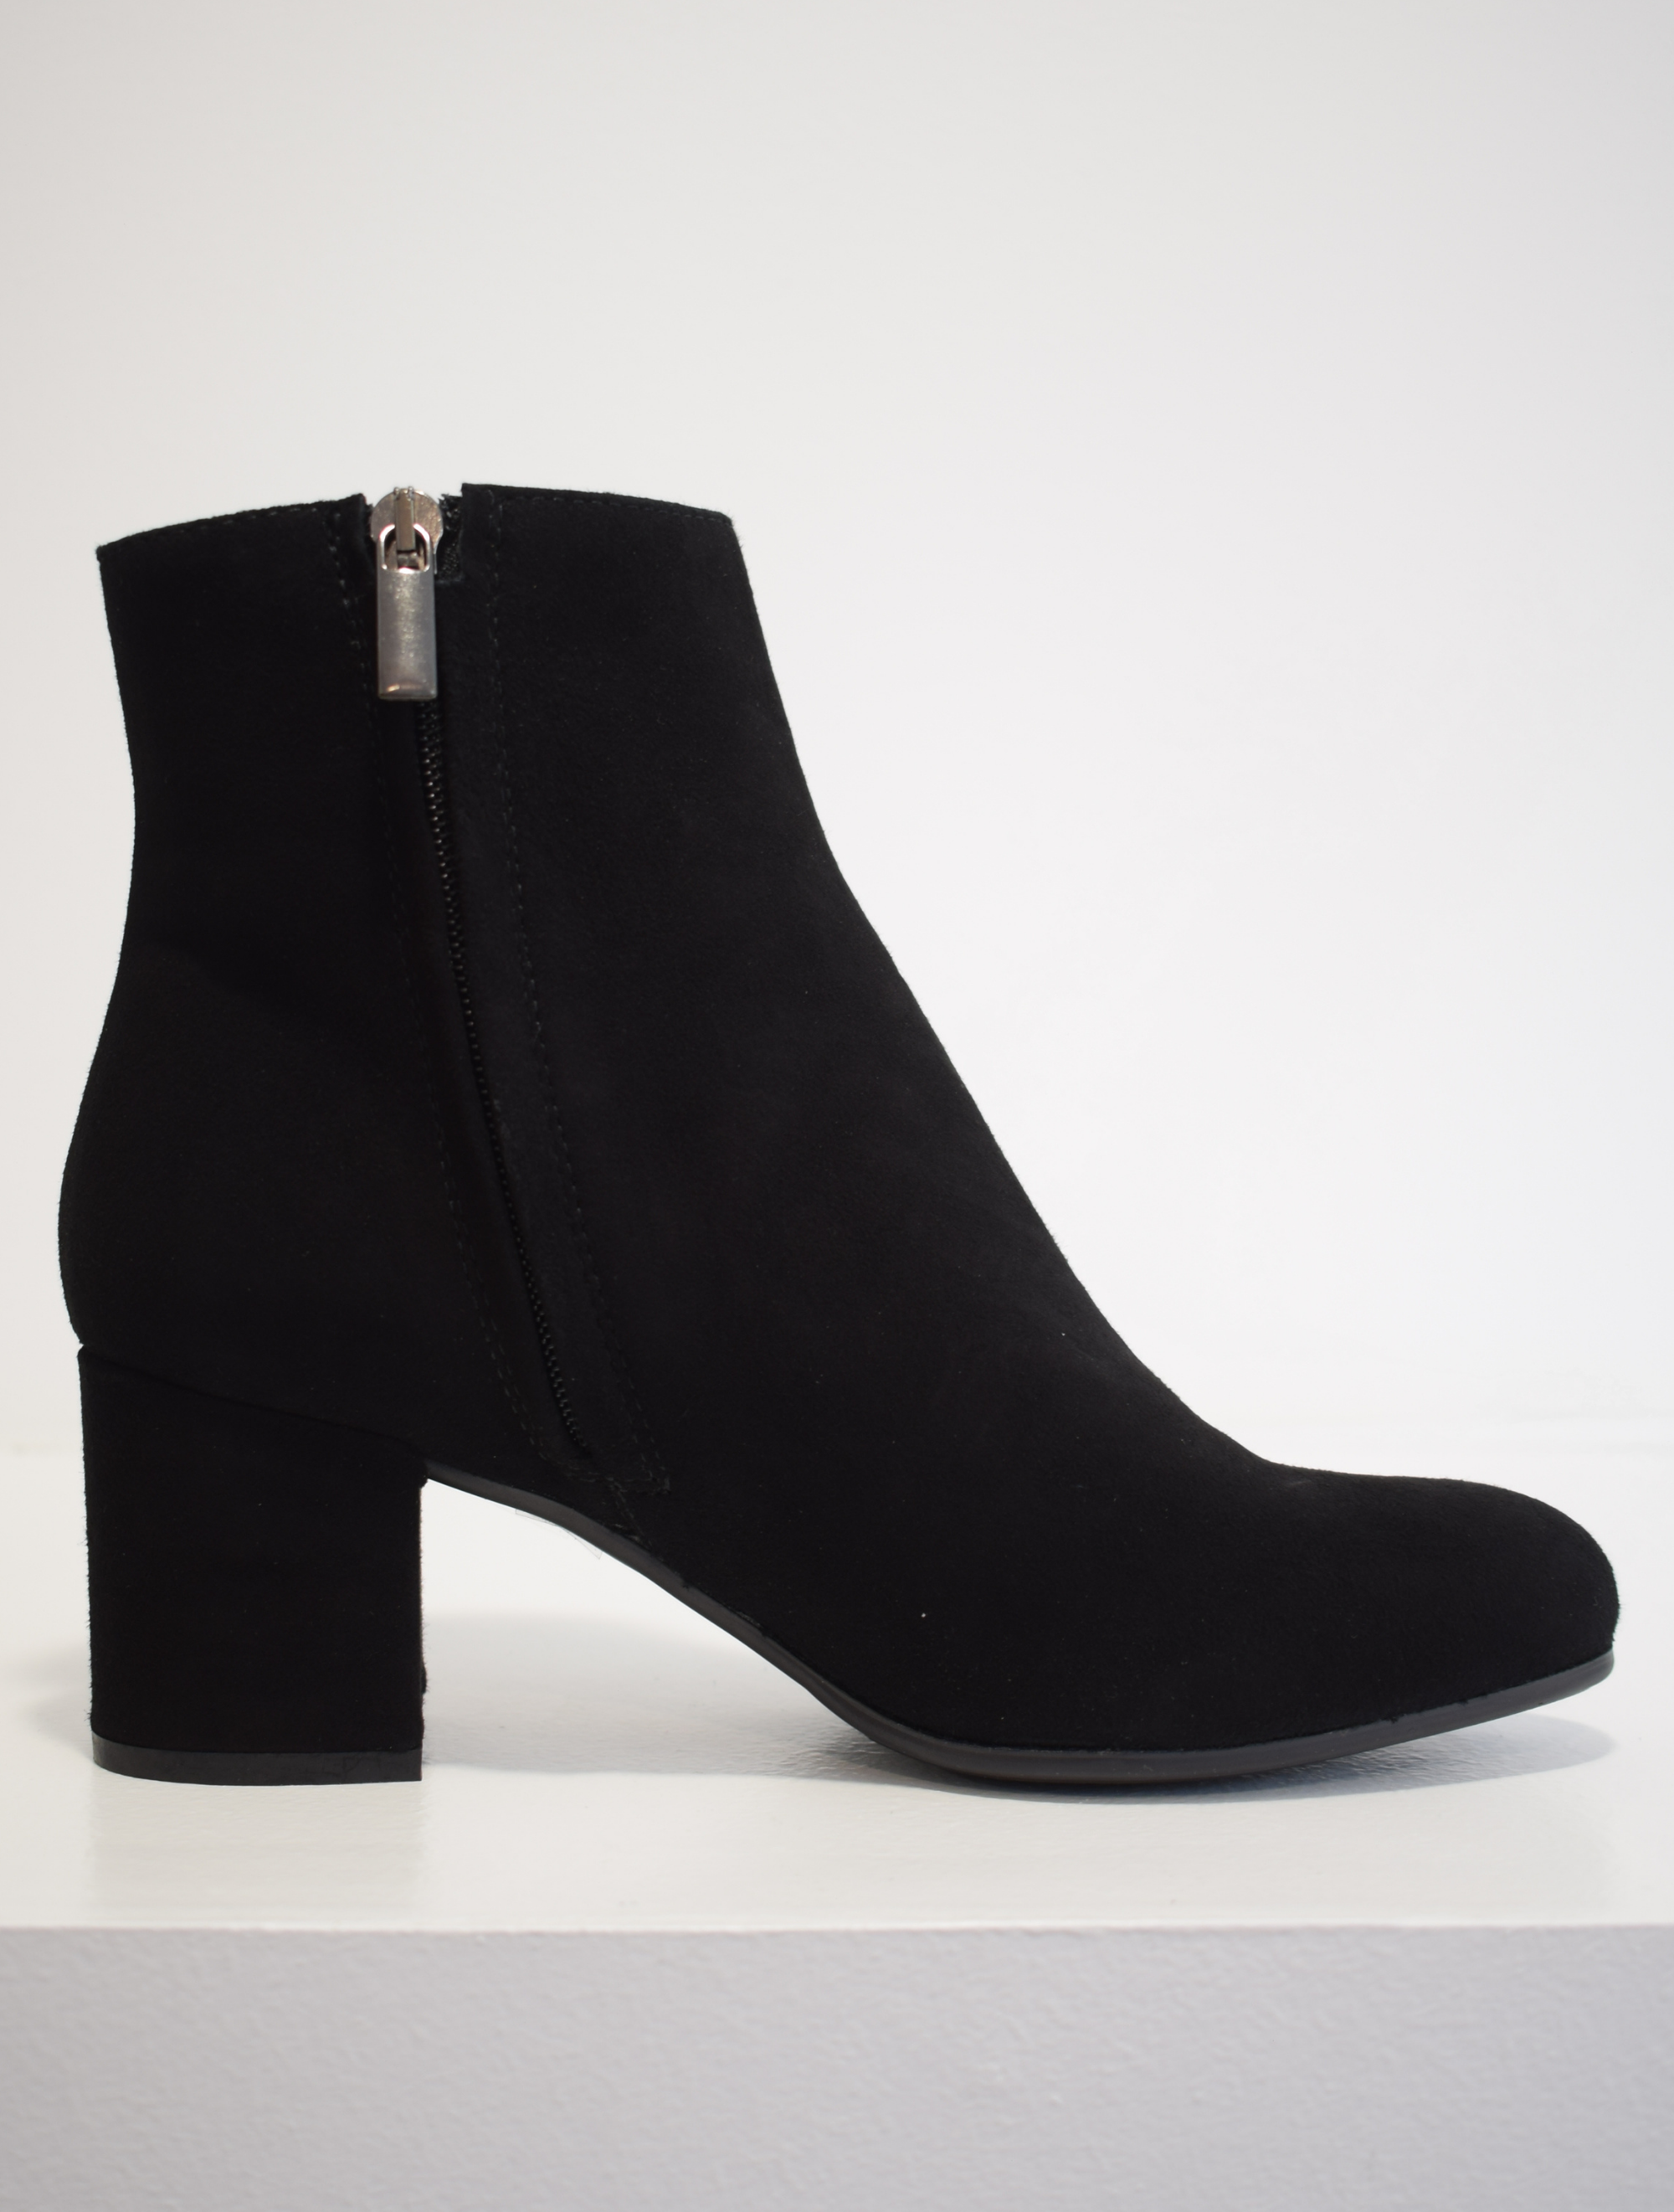 black suede ankle boot with side zip and almond toe